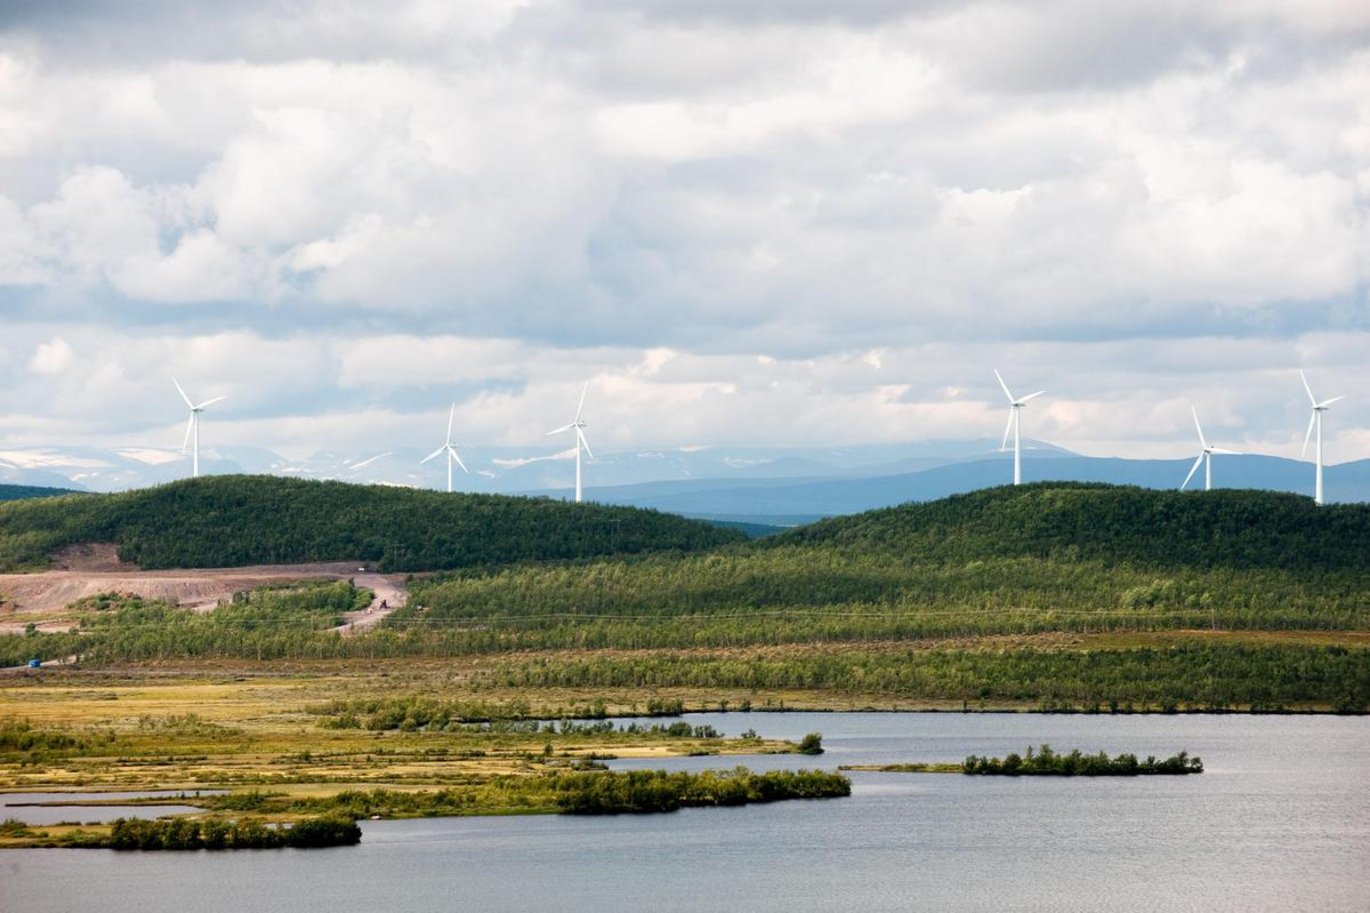 The use of renewable energy have been rising in recent years, especially wind and water power is common. The picture shows windmills in Lapland Sweden.